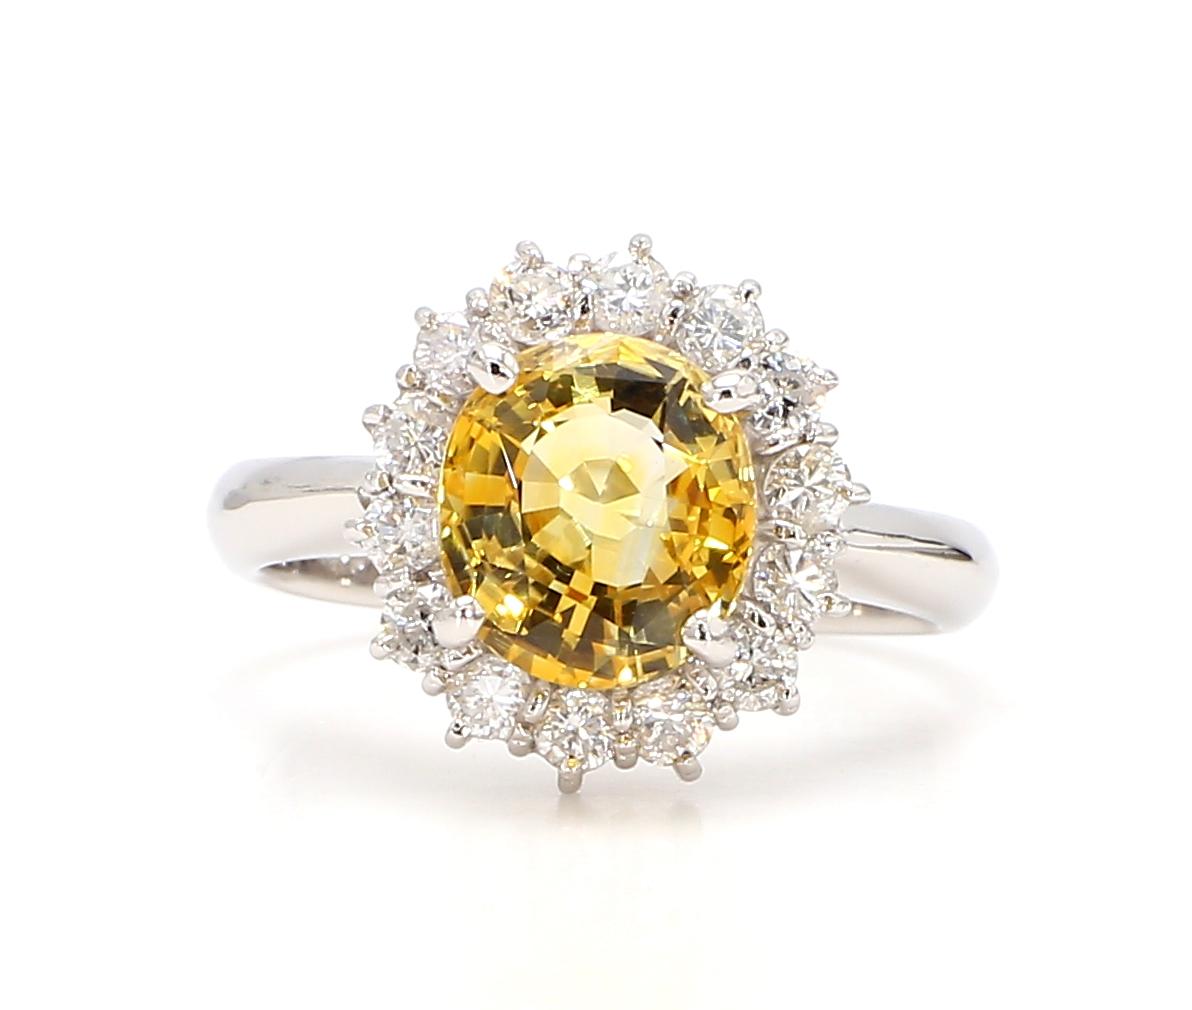 This exquisite Diamond and Yellow Sapphire Ring is a true marvel of elegance and luxury. Crafted with meticulous attention to detail, it showcases the timeless beauty of diamonds and the captivating allure of yellow sapphires. 

The centerpiece of